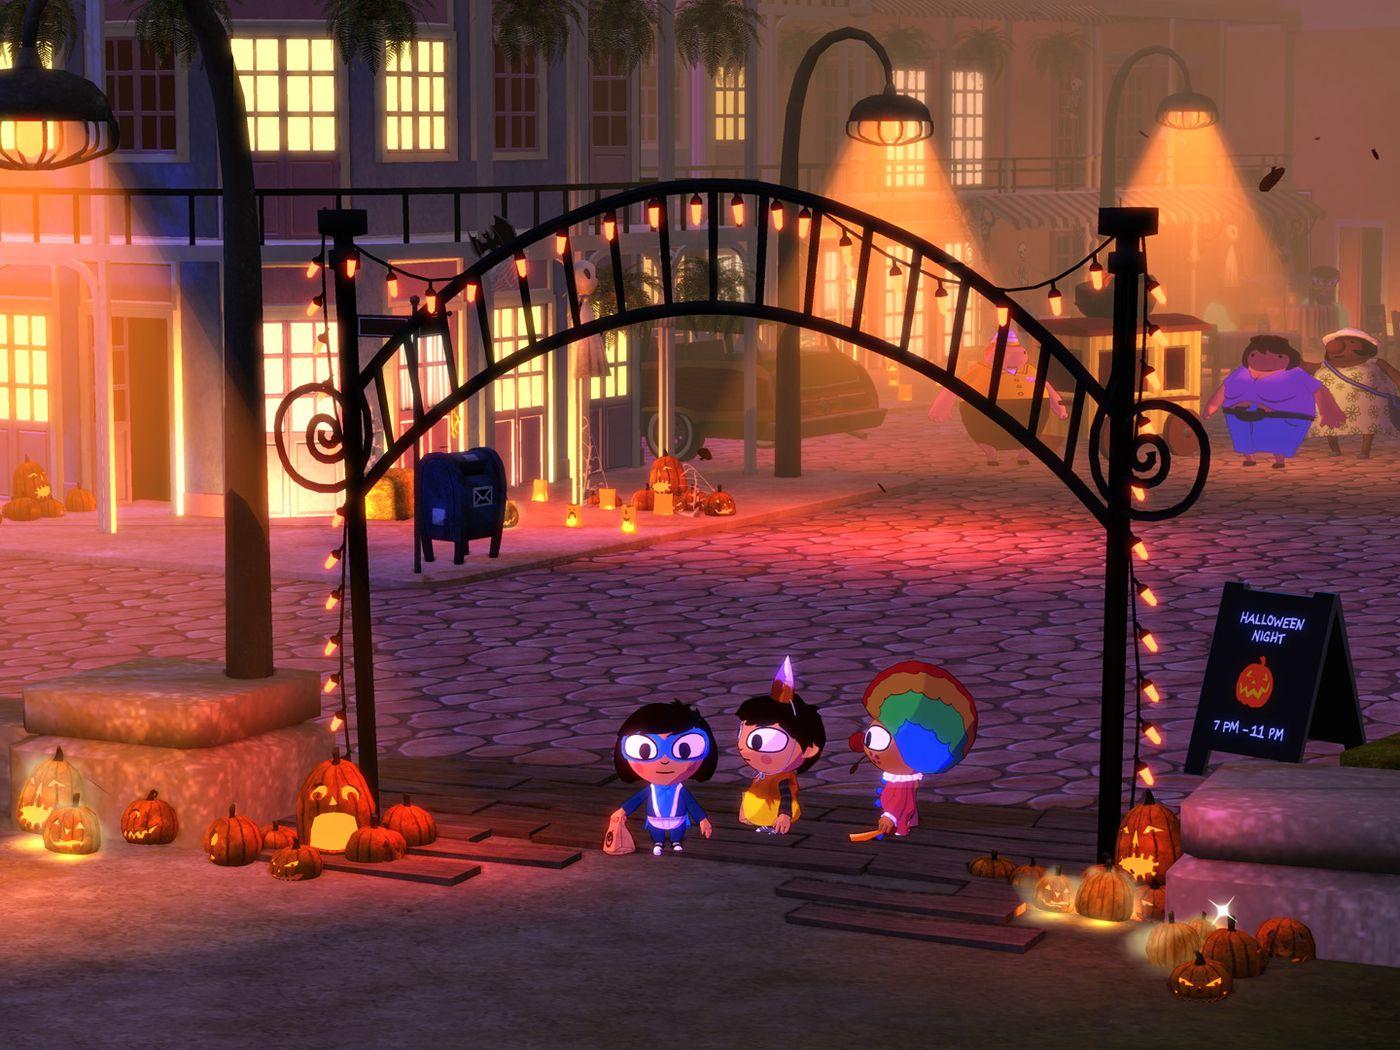 Costume Quest 2 is a treat for fans and shows how Double